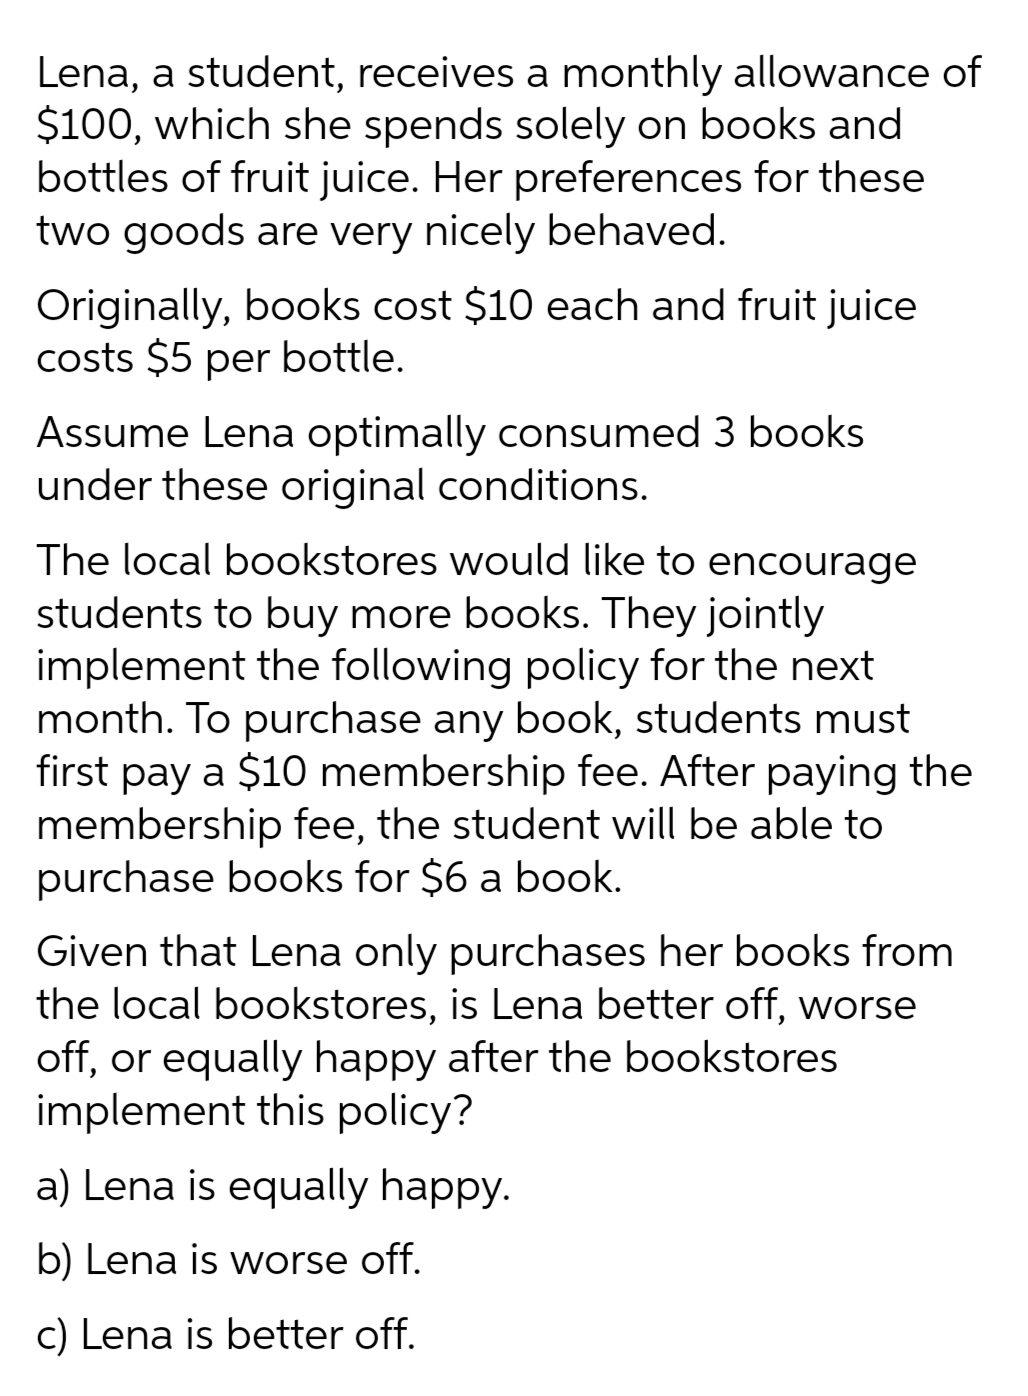 Lena, a student, receives a monthly allowance of
$100, which she spends solely on books and
bottles of fruit juice. Her preferences for these
two goods are very nicely behaved.
Originally, books cost $10 each and fruit juice
costs $5 per bottle.
Assume Lena optimally consumed 3 books
under these original conditions.
The local bookstores would like to encourage
students to buy more books. They jointly
implement the following policy for the next
month. To purchase any book, students must
first pay a $10 membership fee. After paying the
membership fee, the student will be able to
purchase books for $6 a book.
Given that Lena only purchases her books from
the local bookstores, is Lena better off, worse
off, or equally happy after the bookstores
implement this policy?
a) Lena is equally happy.
b) Lena is worse off.
c) Lena is better off.
